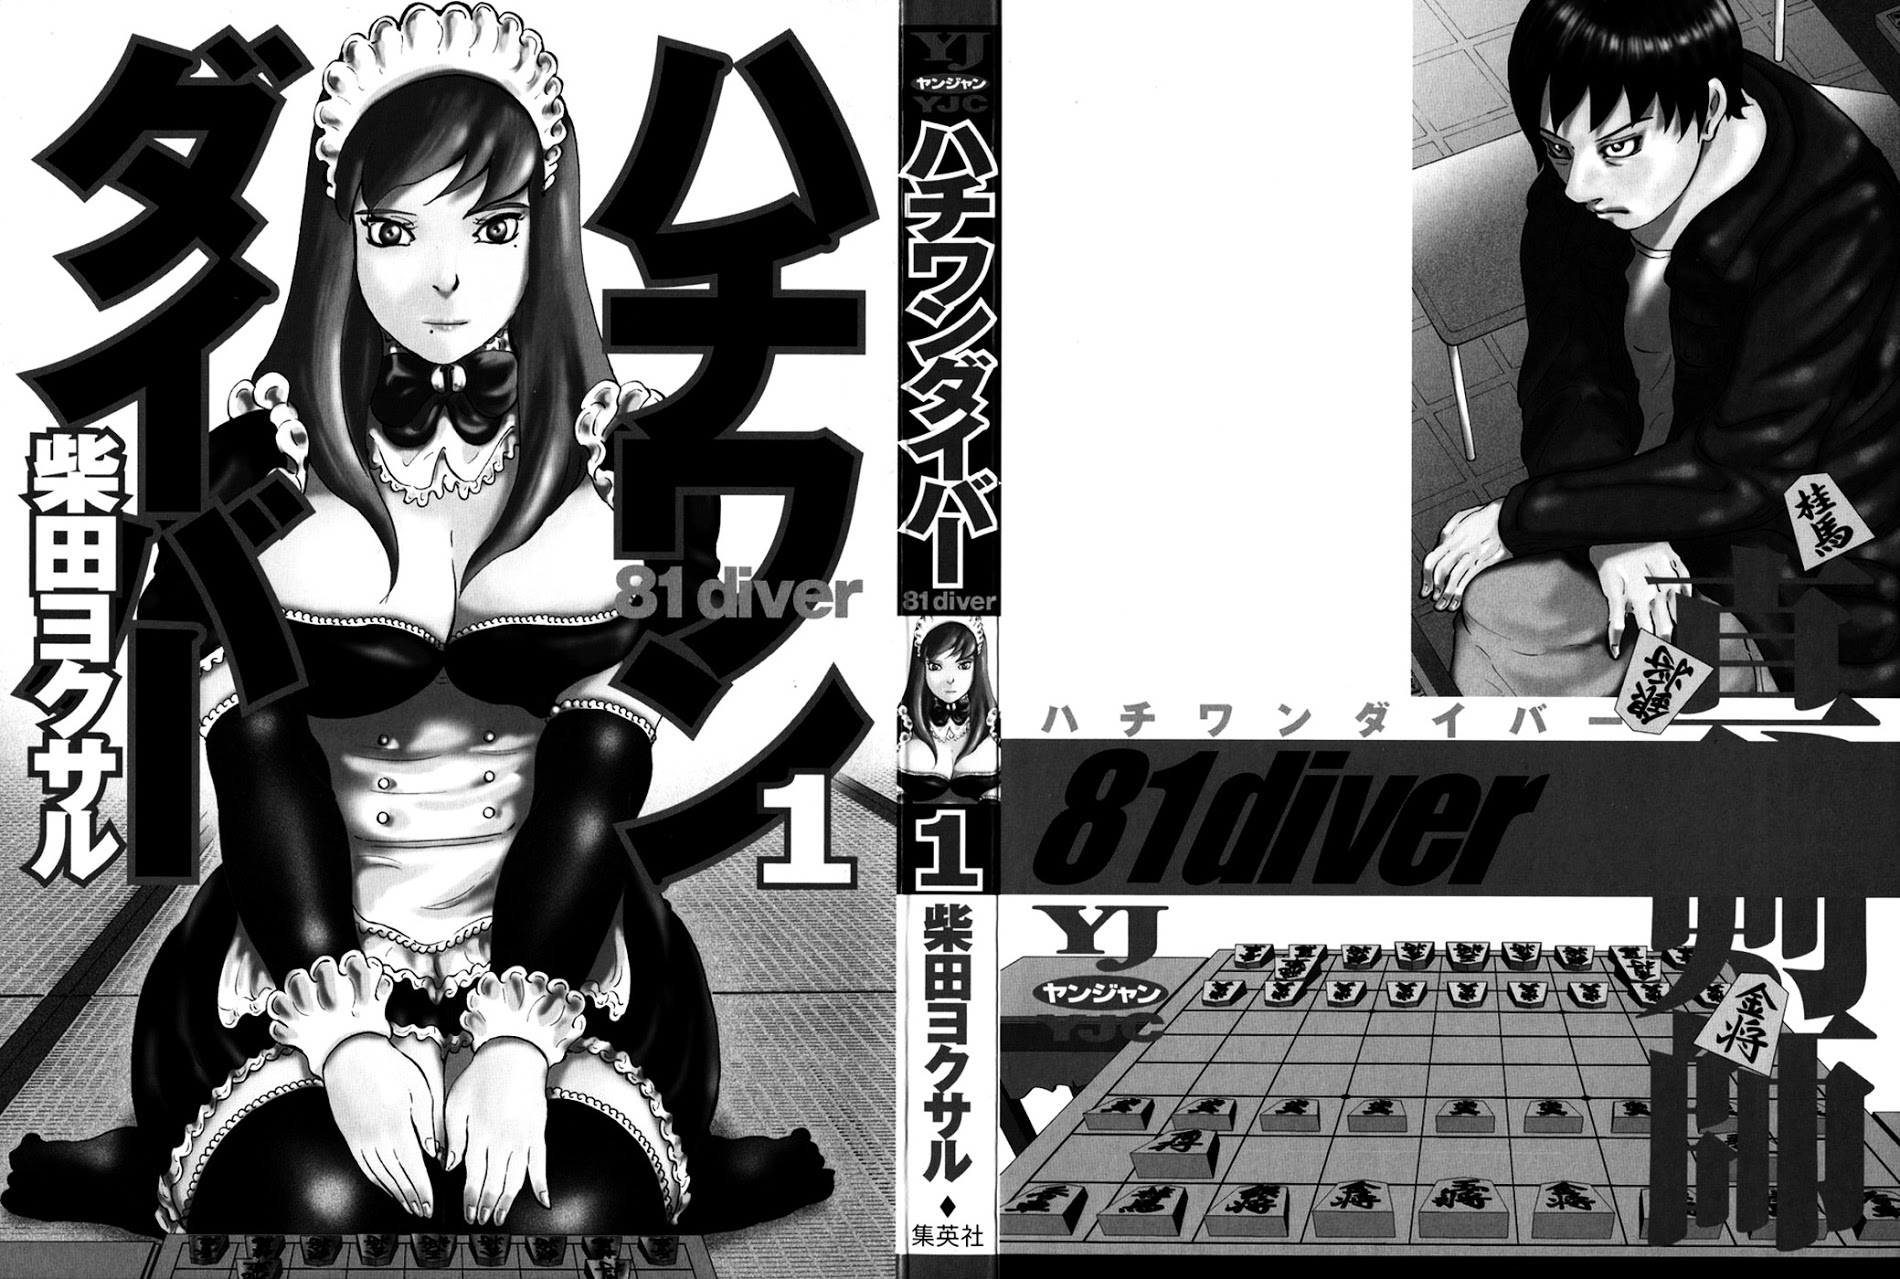 81 Diver Vol.1 Chapter 1 : Ukeshi Of Akiba - Picture 3